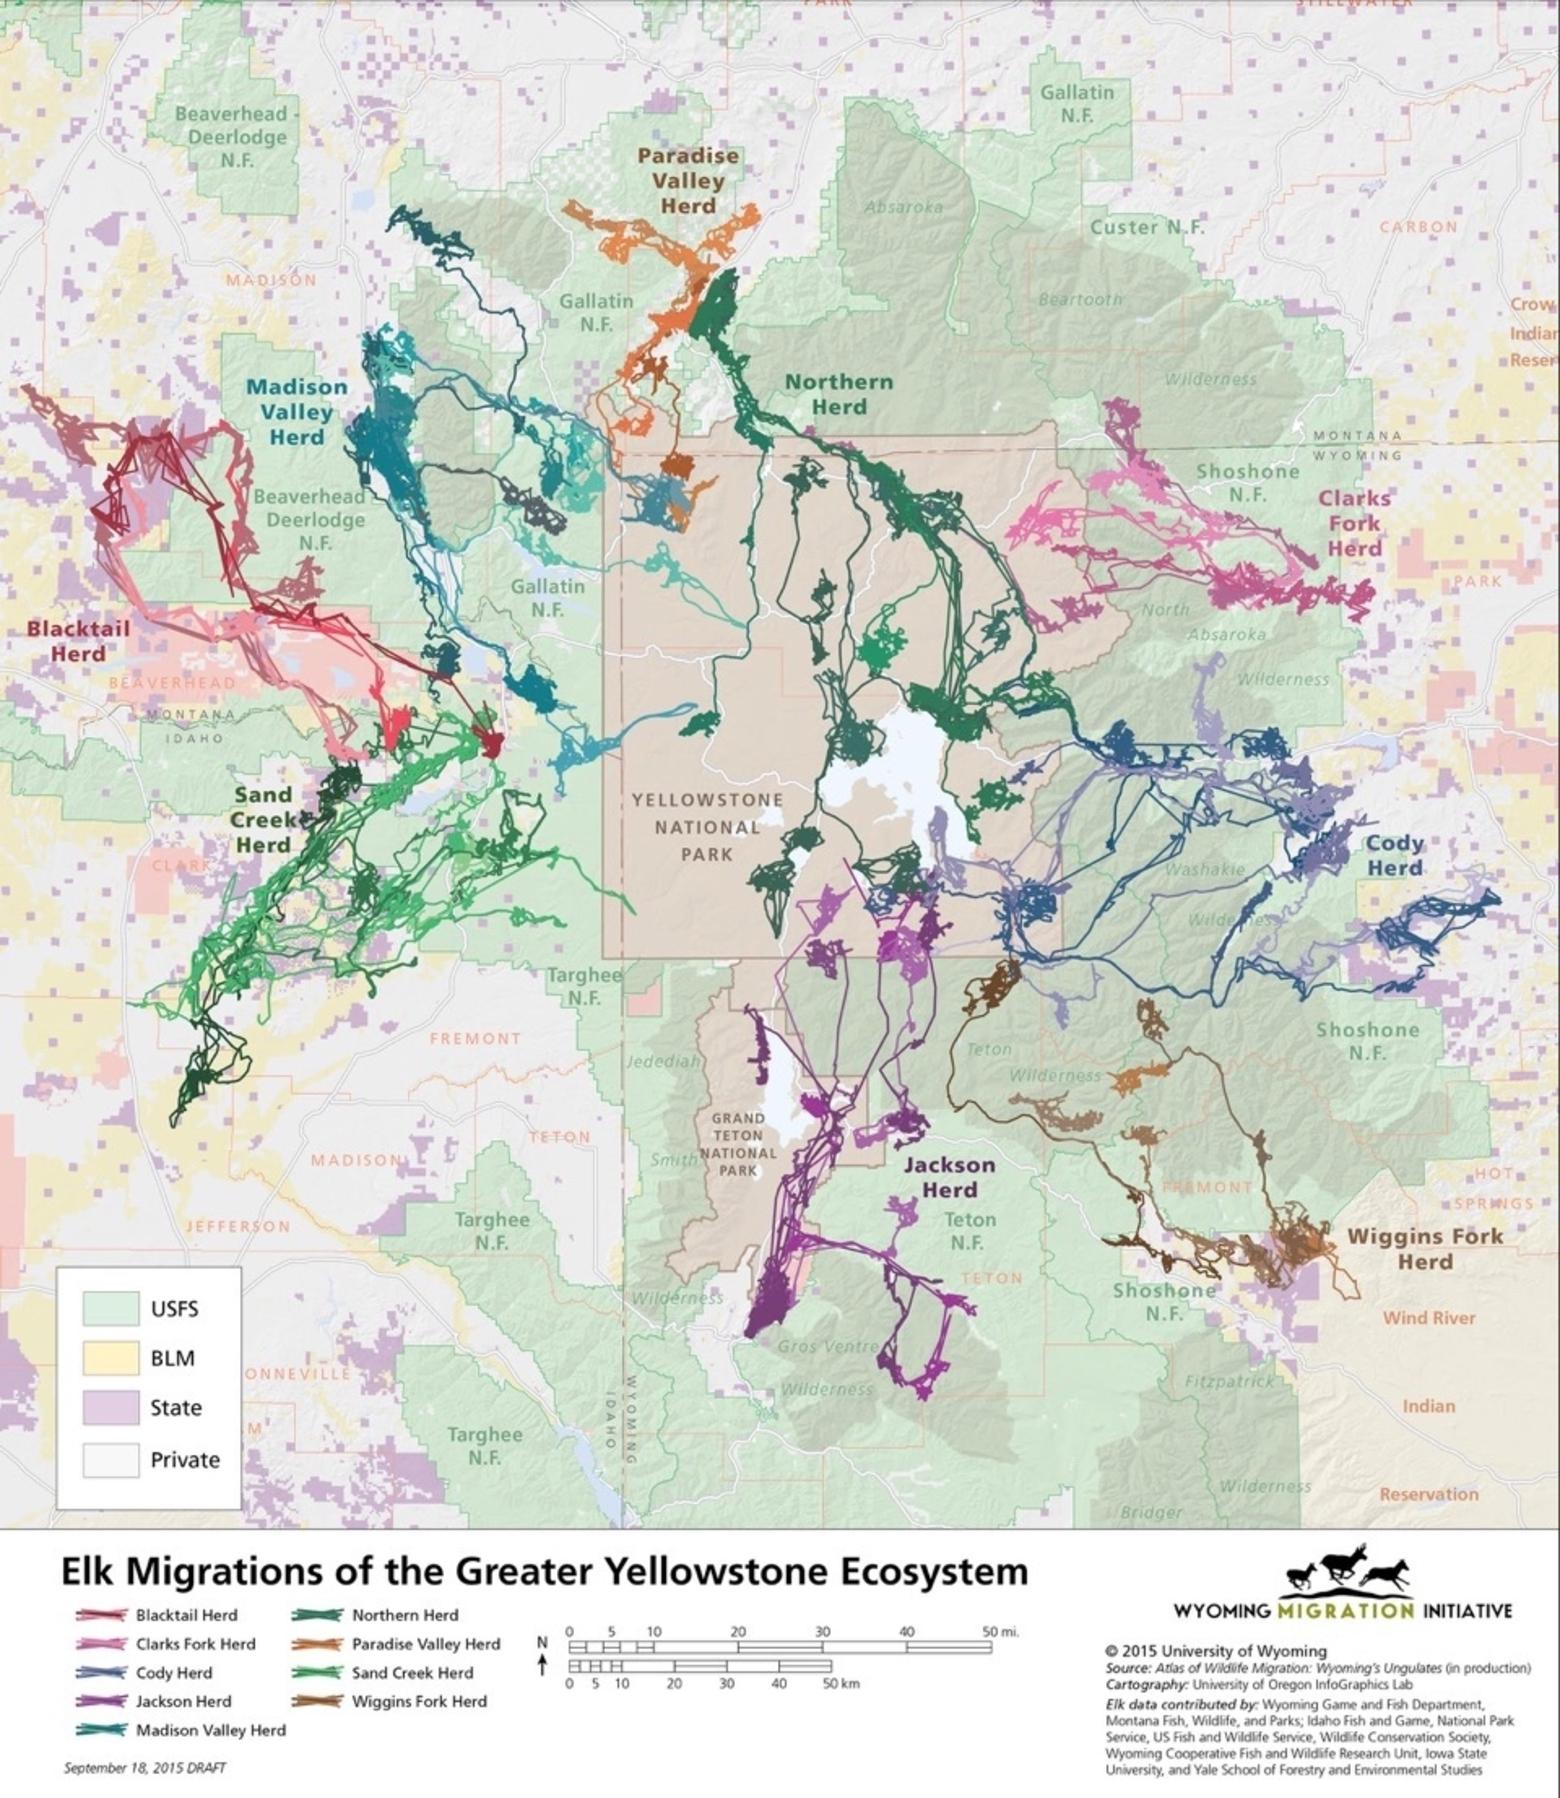 Map of Greater Yellowstone elk migrations created by the Wyoming Migration Initiative. Note how the Jackson Elk Herd shares summer range with other herds in Yellowstone National Park which, in turn, come in contact with other herds fanning out across the northern, western and eastern tiers of the Greater Yellowstone Ecosystem.  This is one way scientists say CWD might quickly spread.